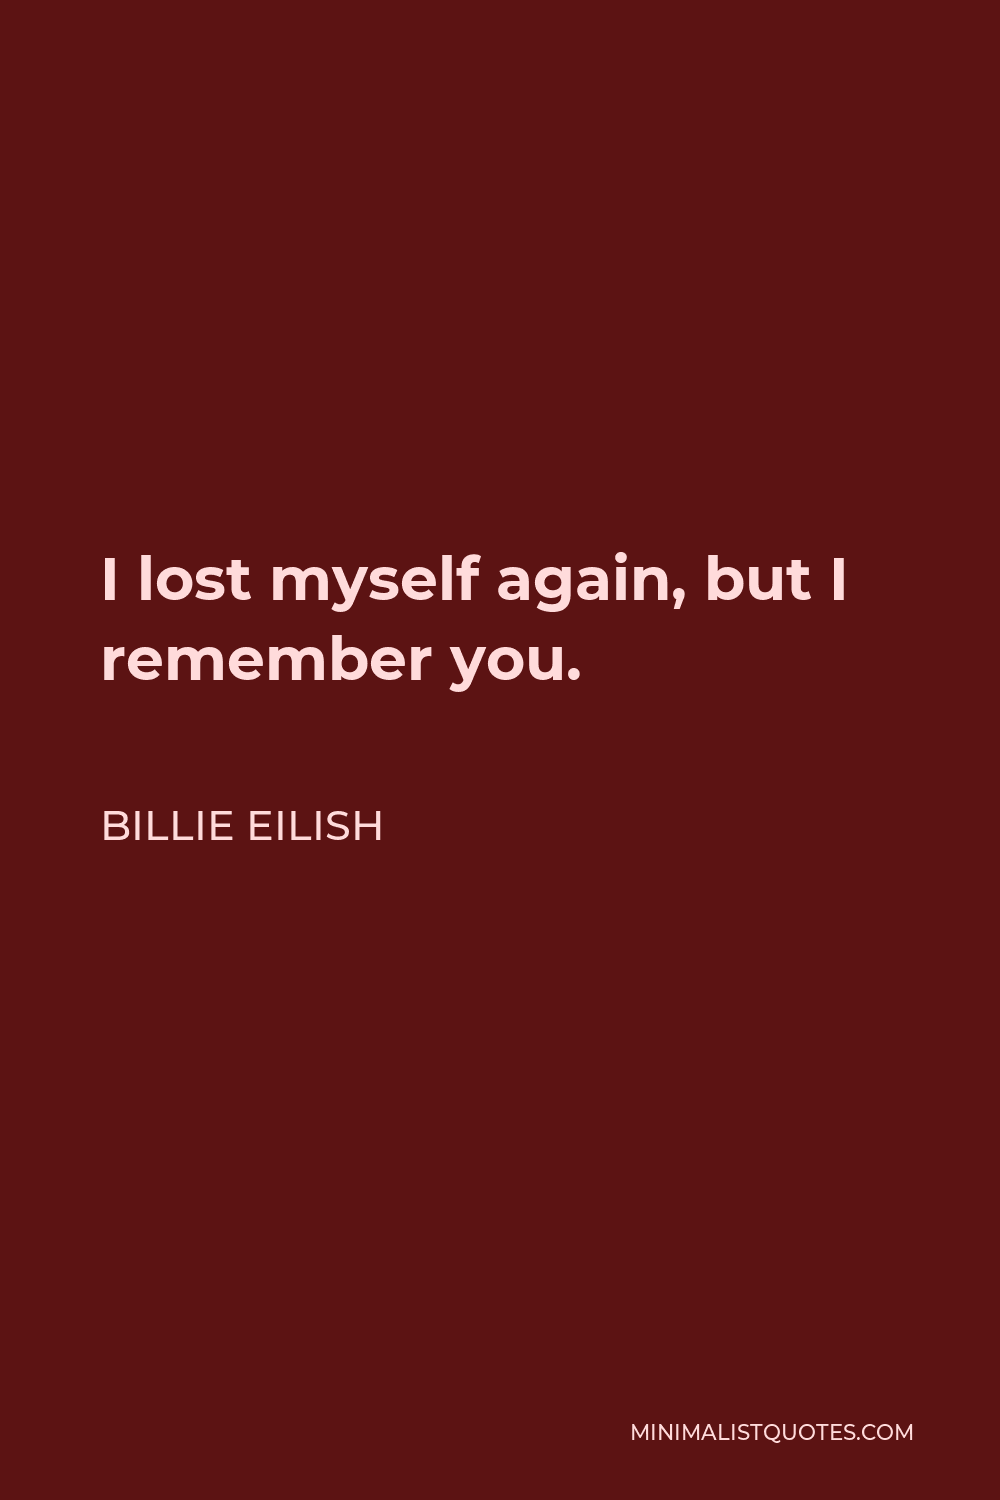 Billie Eilish Quote - I lost myself again, but I remember you.